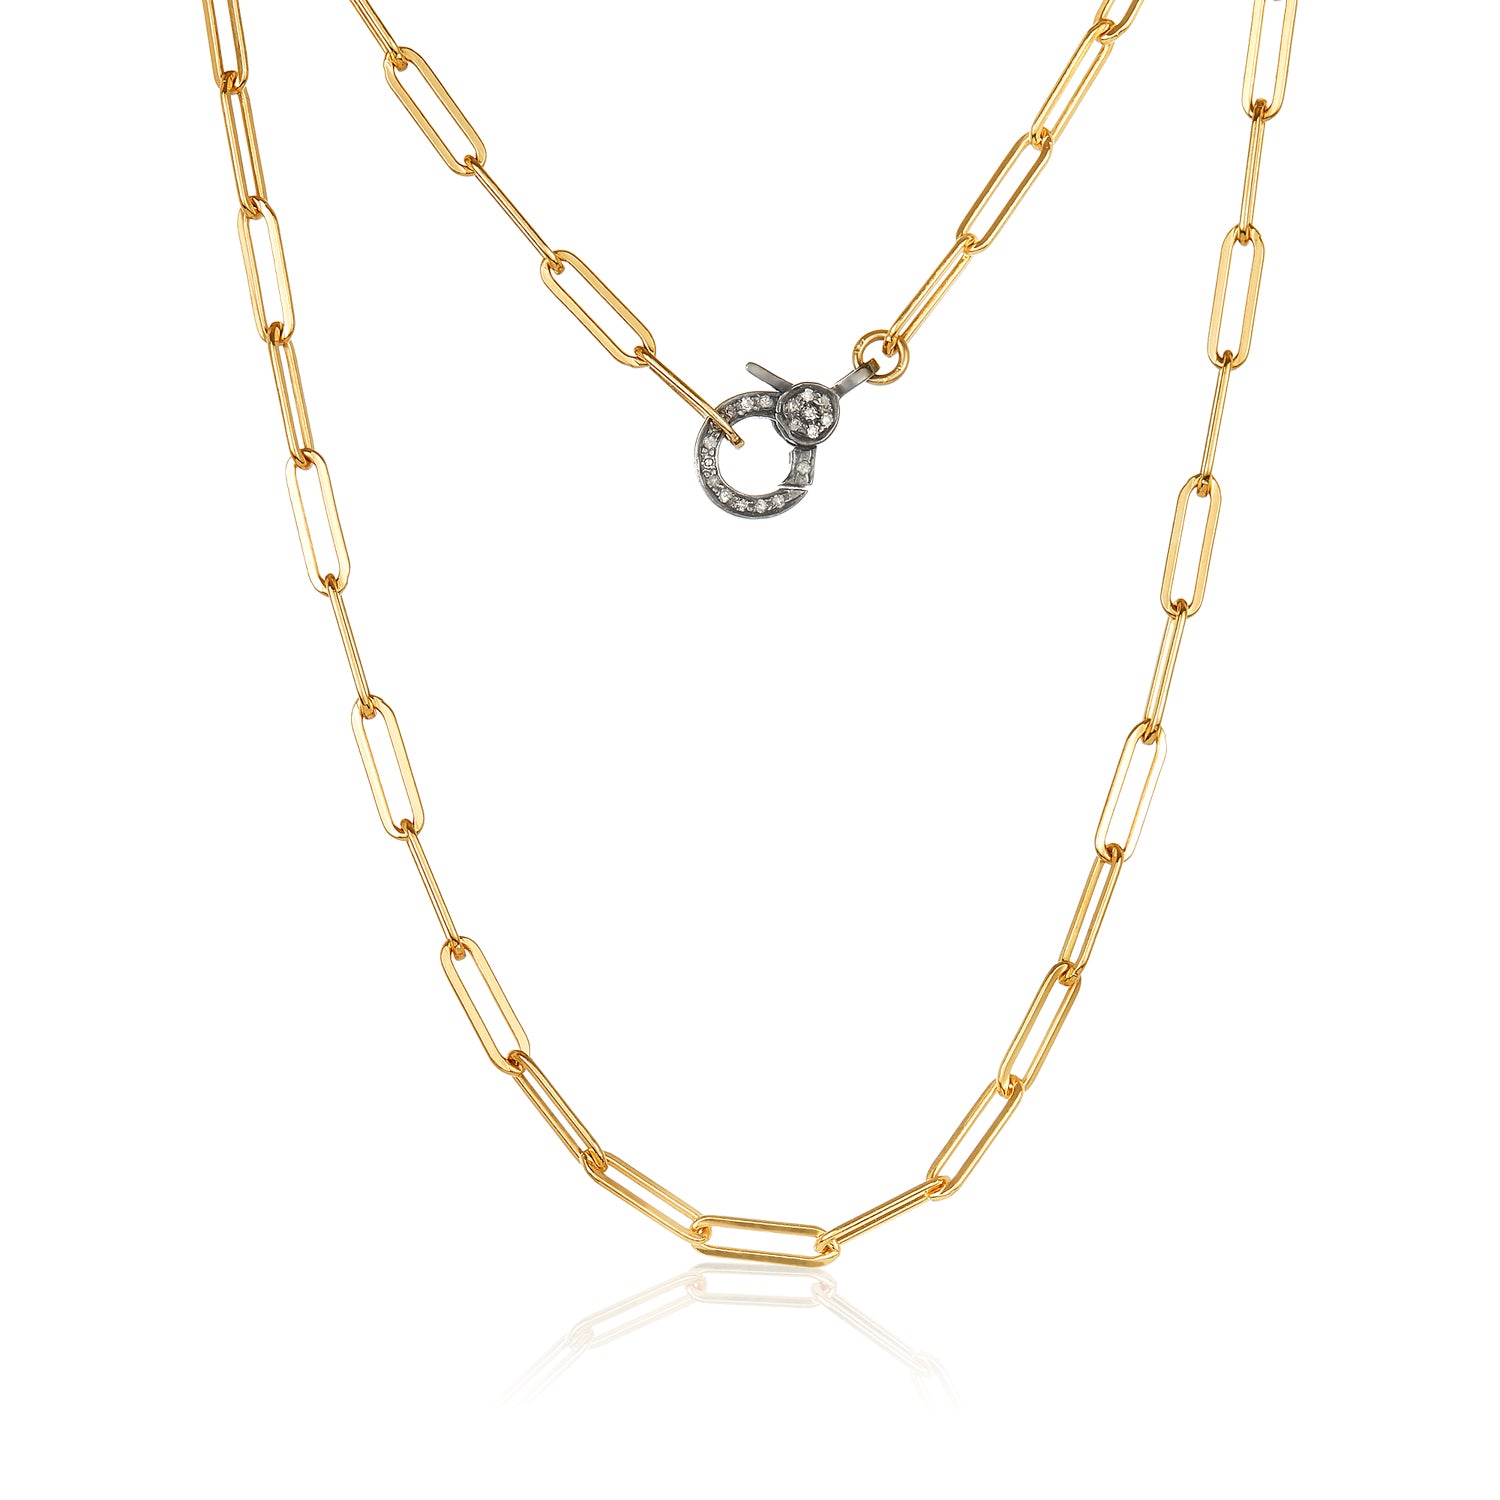 Polly Gold Paperclip Necklace